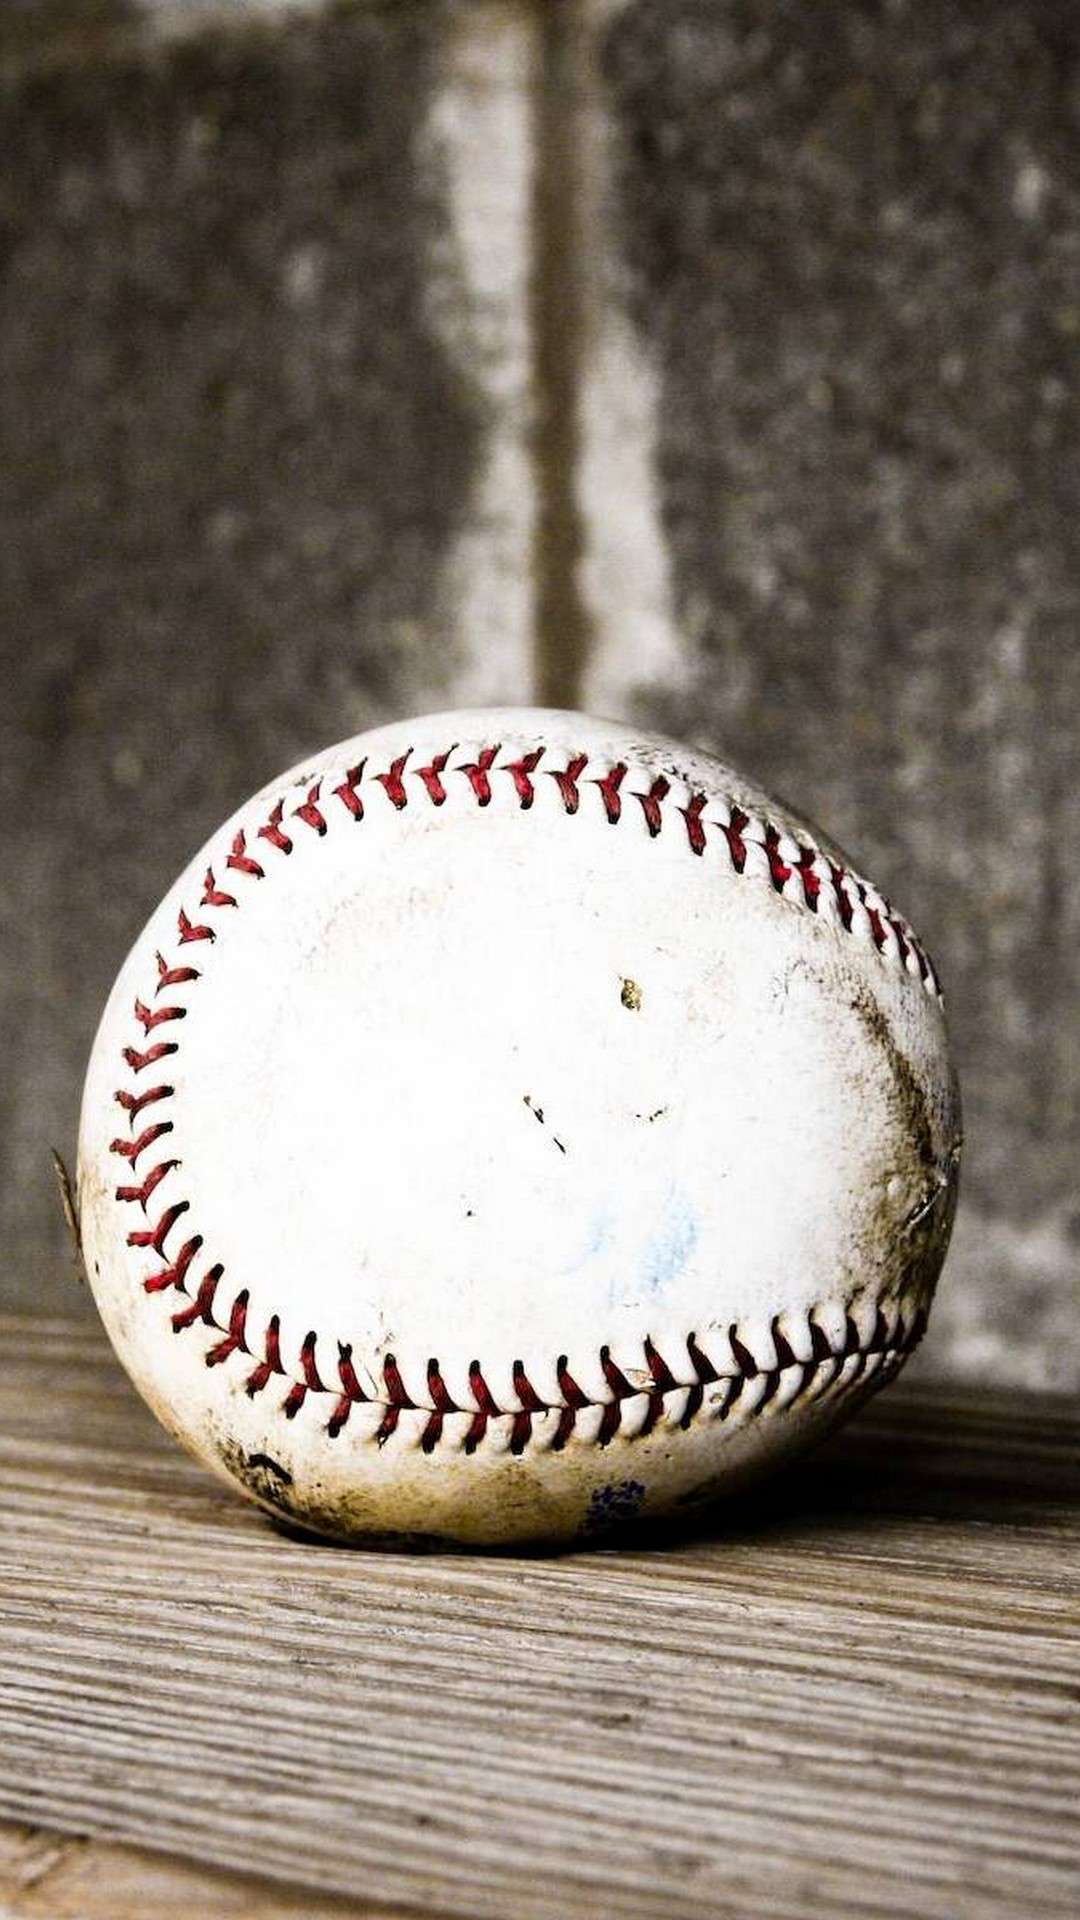 iPhone Wallpaper HD Baseball with high-resolution 1080x1920 pixel. You can use this wallpaper for Mac Desktop Wallpaper, Laptop Screensavers, Android Wallpapers, Tablet or iPhone Home Screen and another mobile phone device